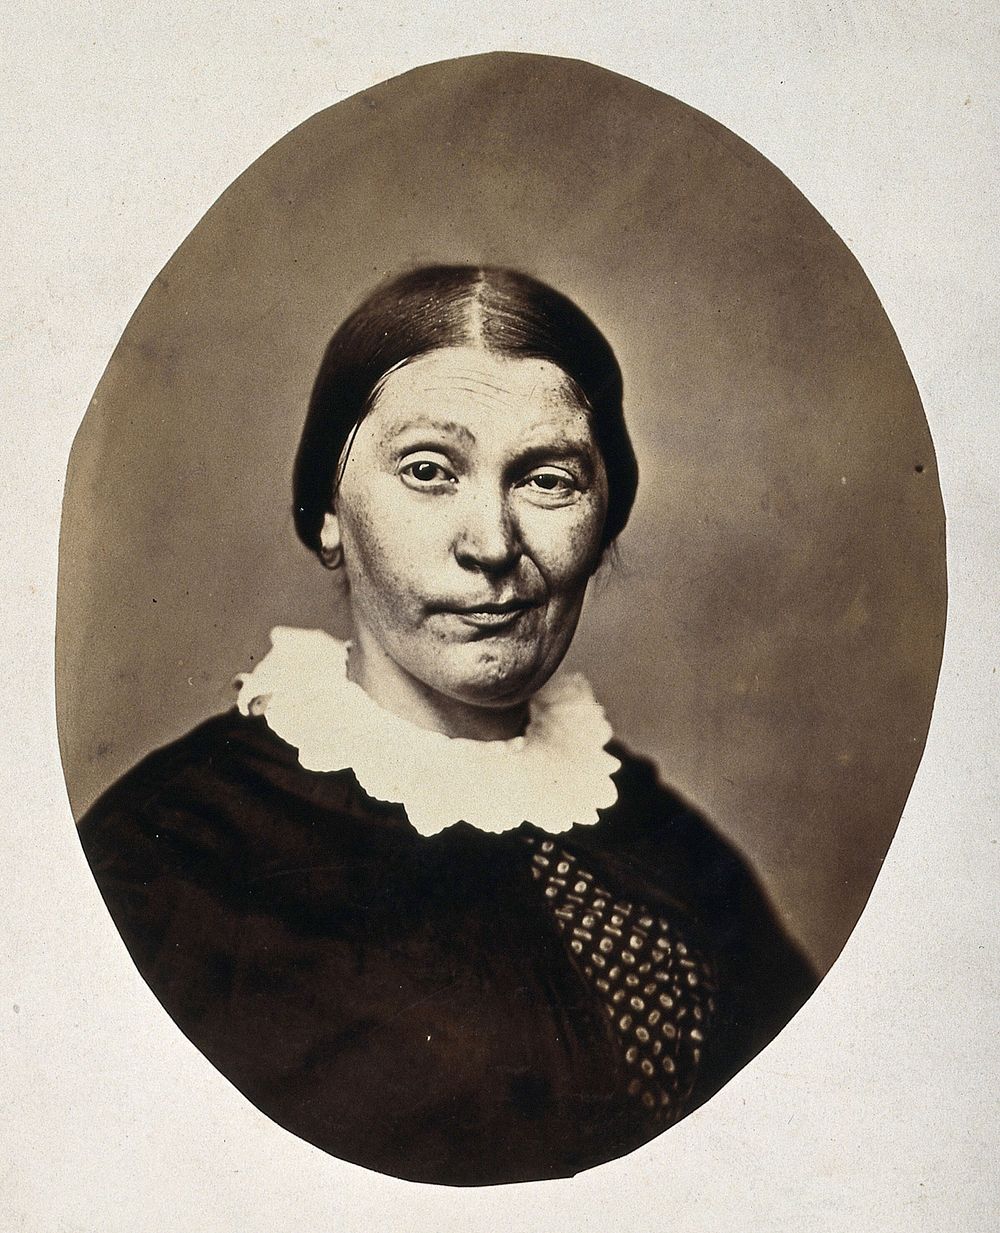 A woman's head and shoulders; her mouth is twisted into a grimace. Photograph by L. Haase after H.W. Berend, 1864.